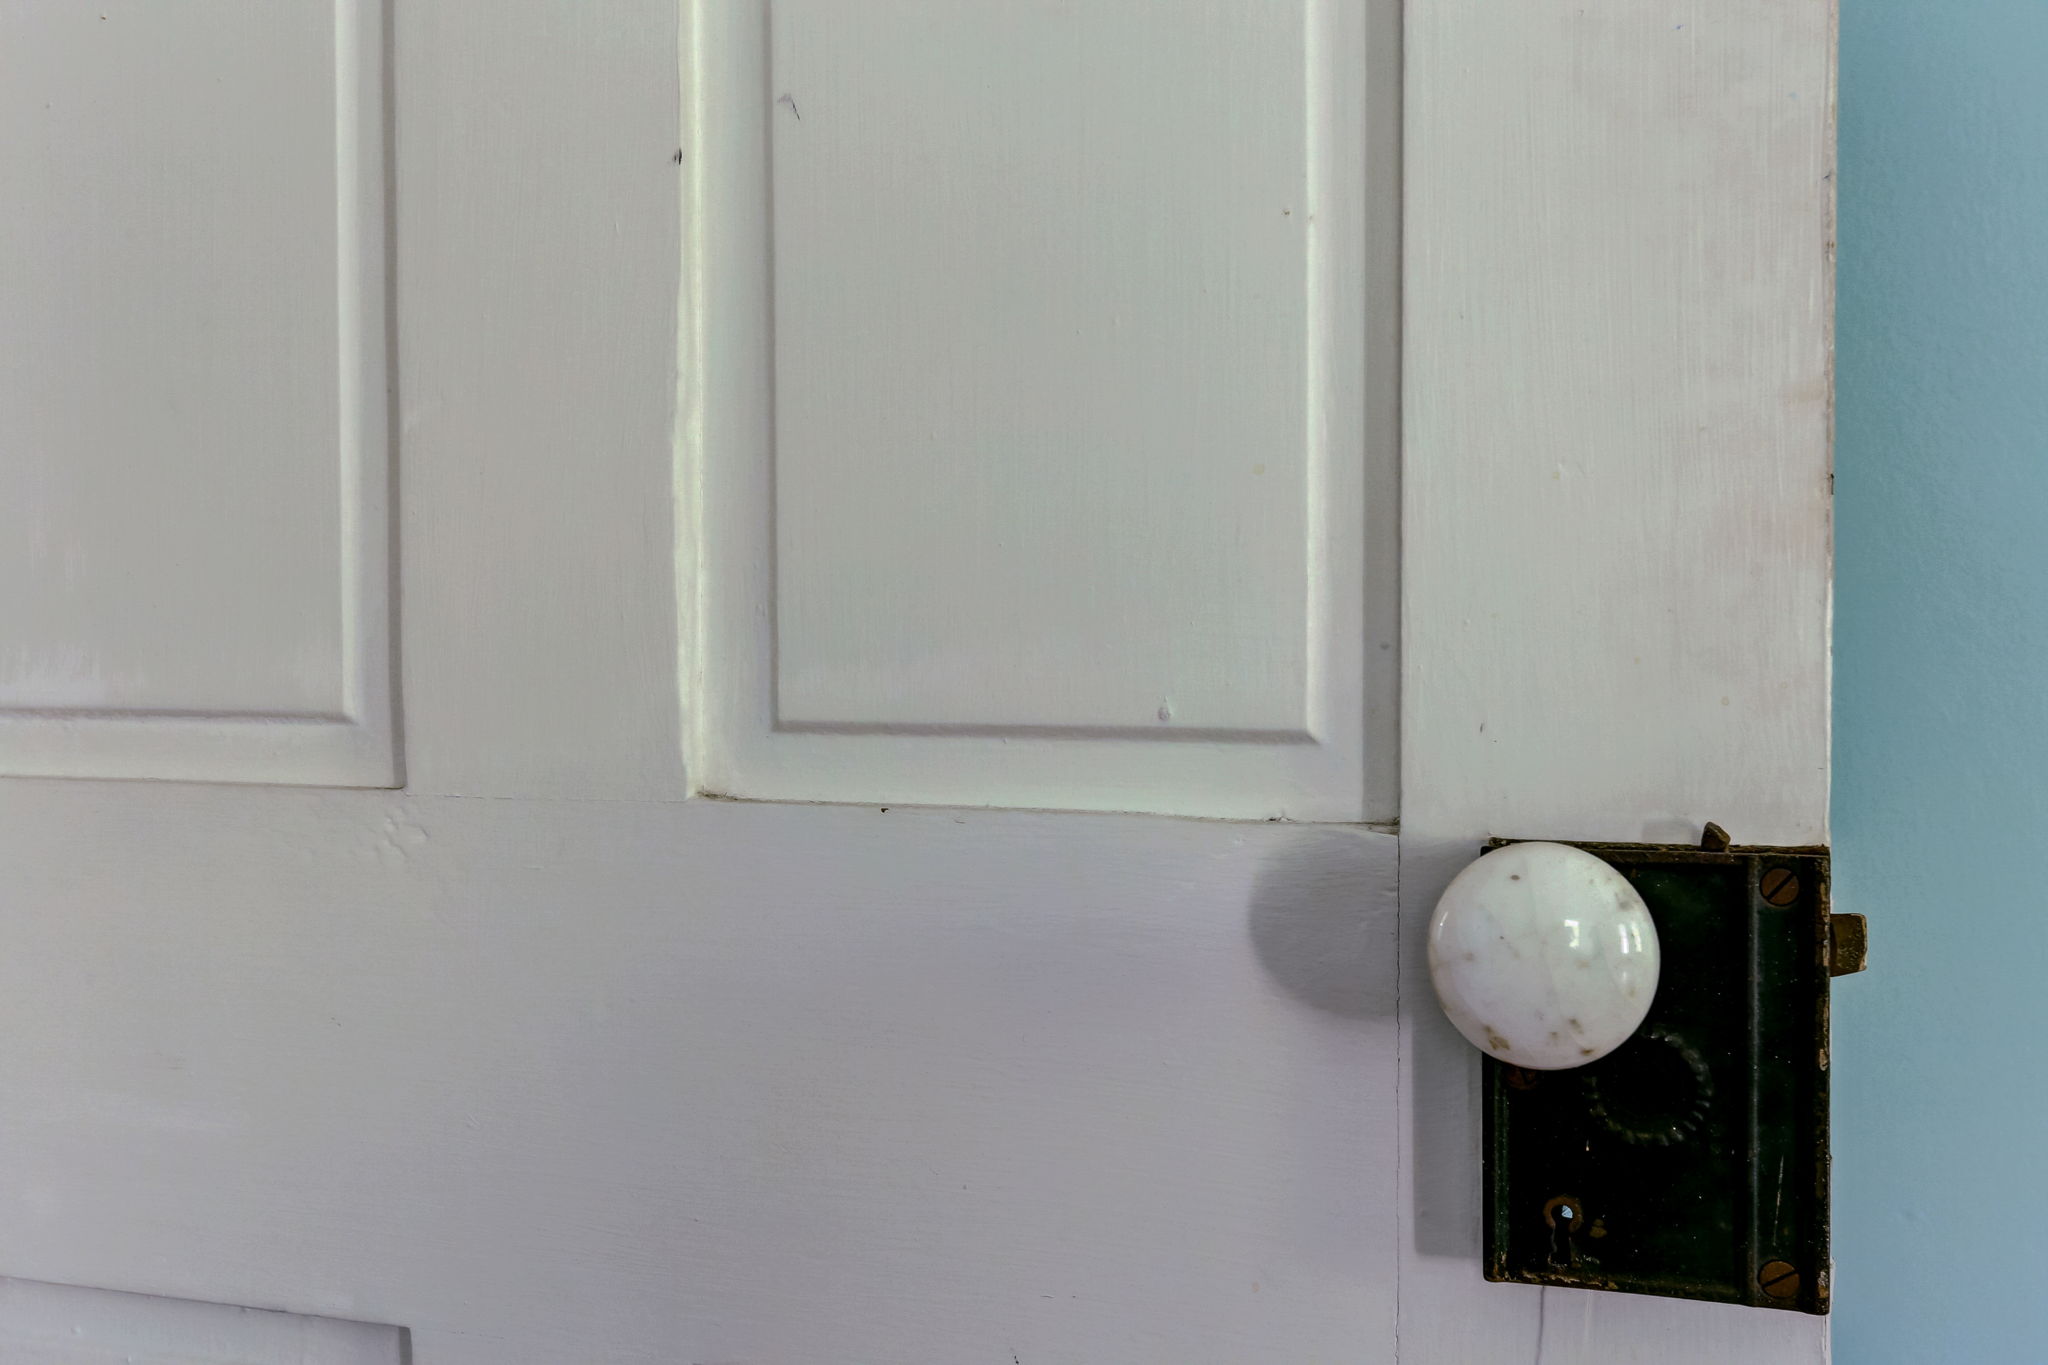 Period doorknobs throughout house